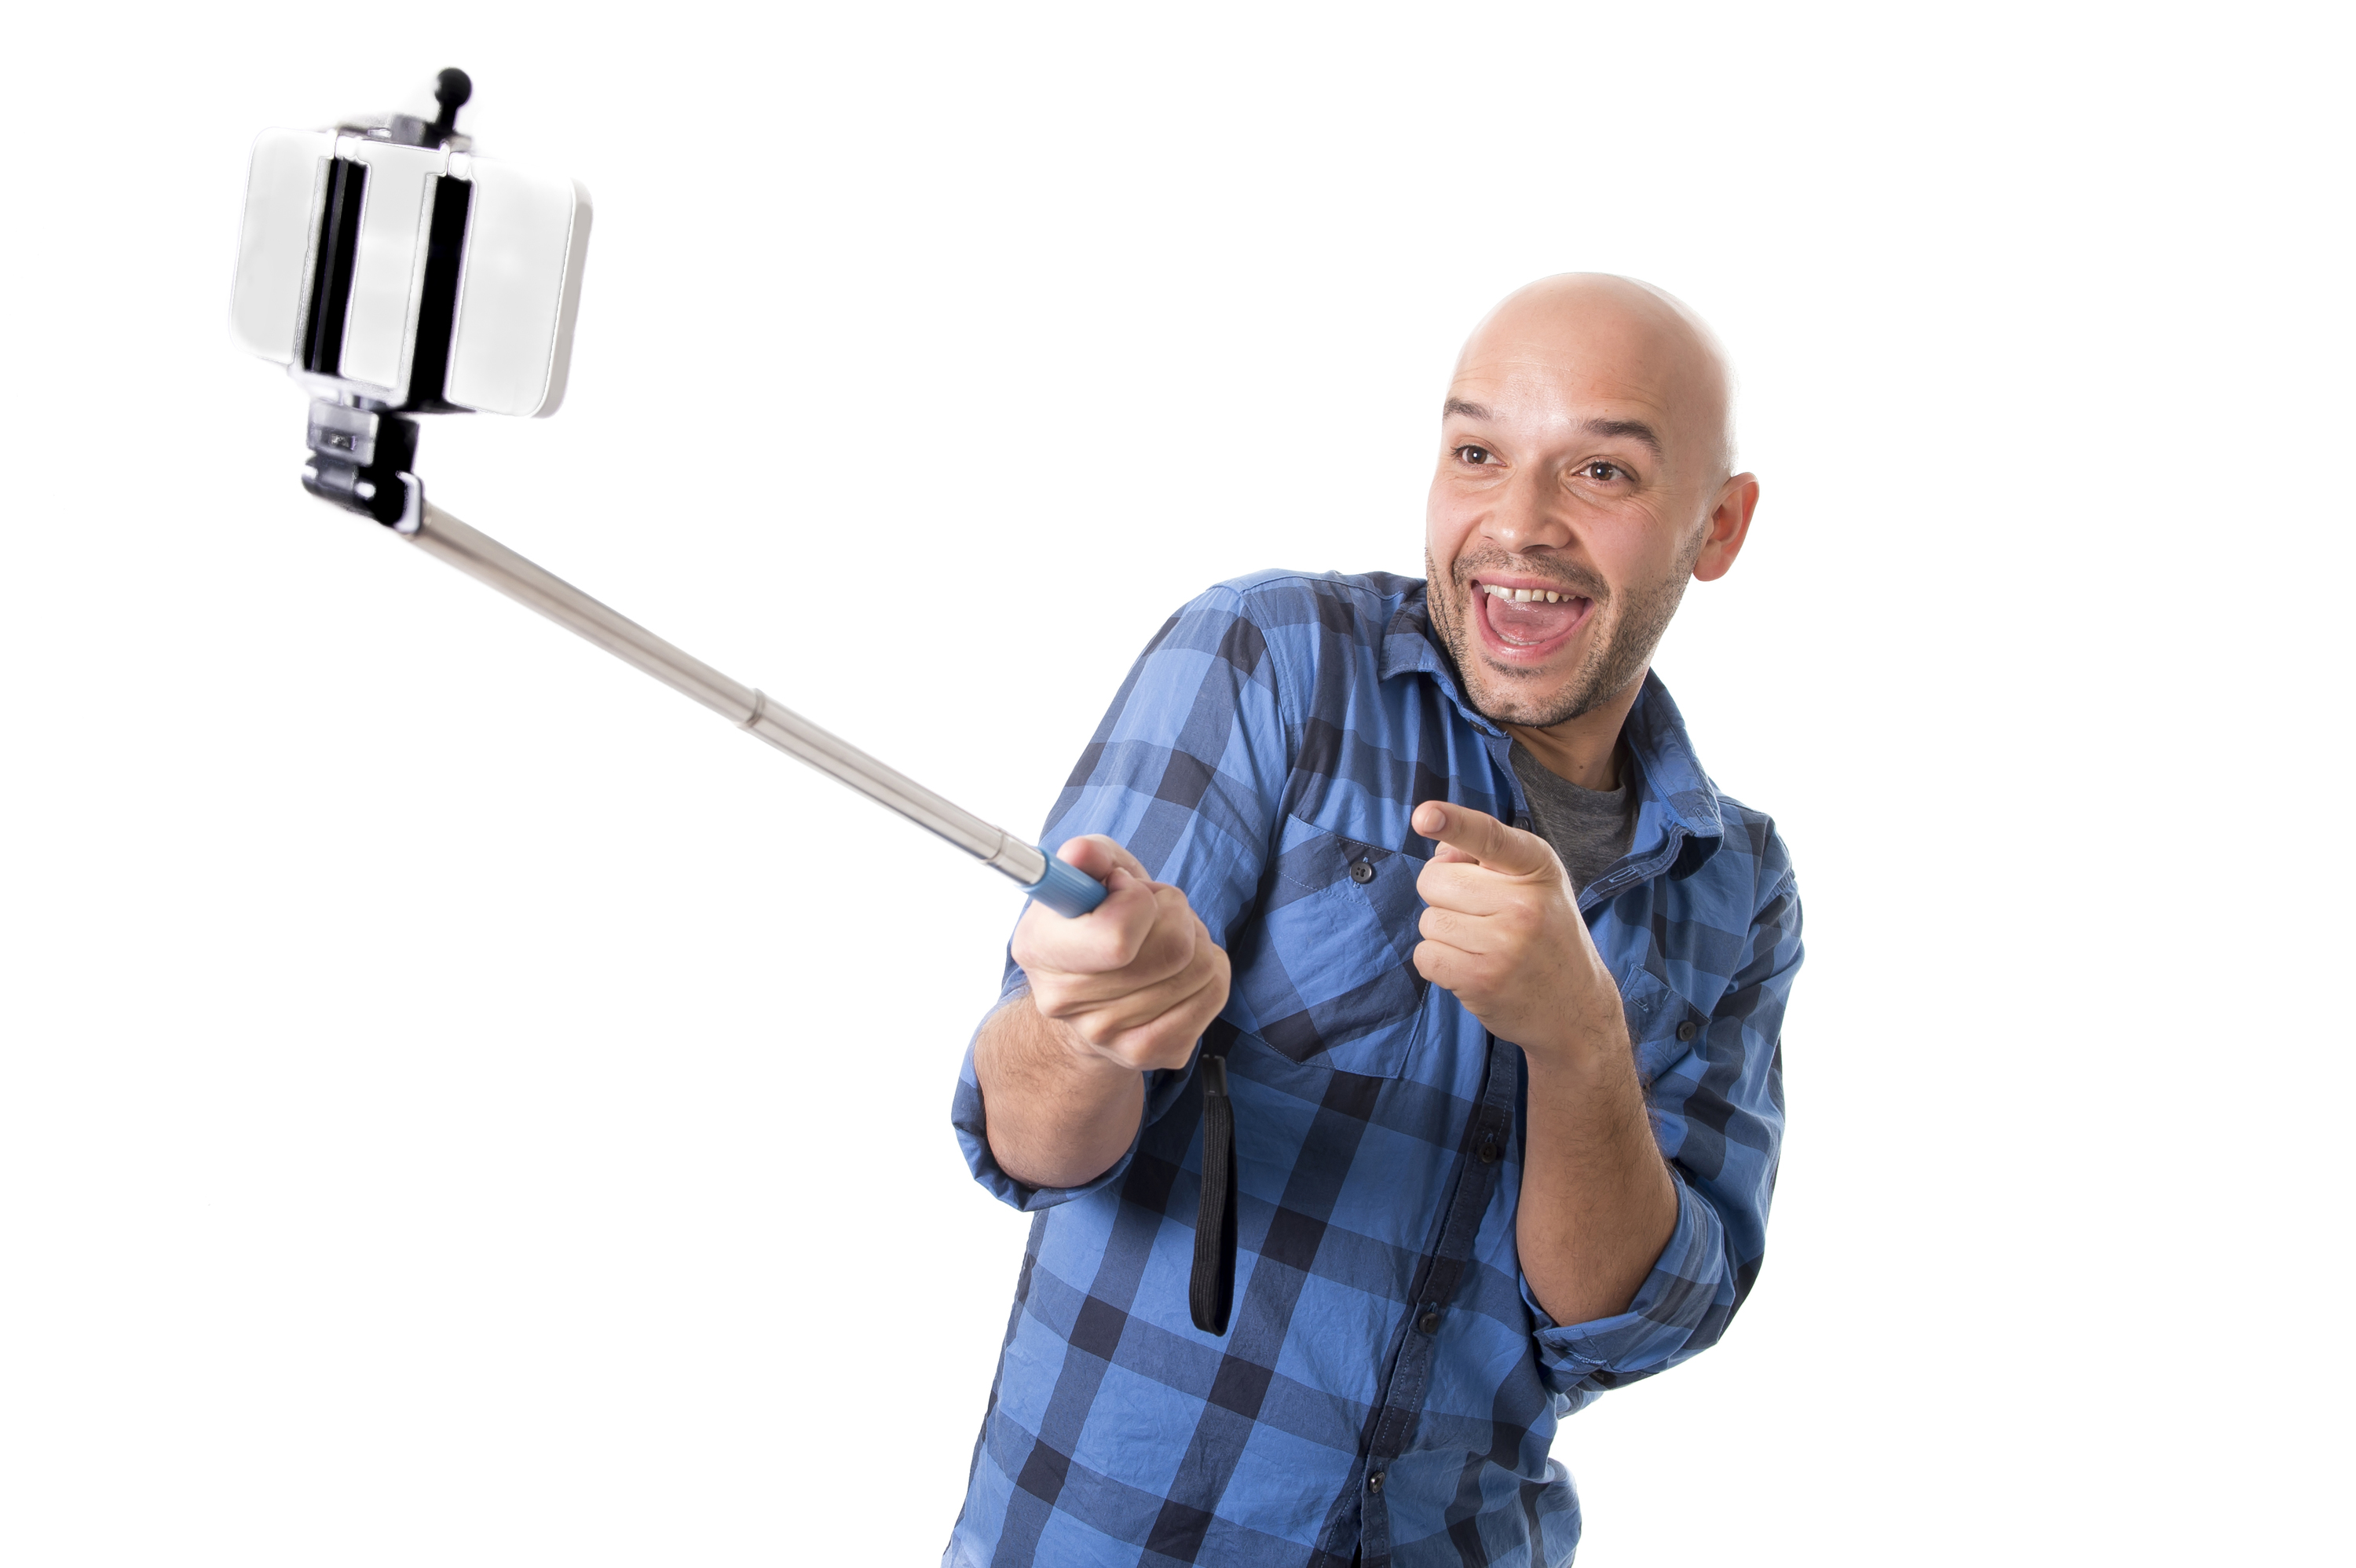 Museums Ban Selfie Sticks Because You Might Put A Hole In The Art